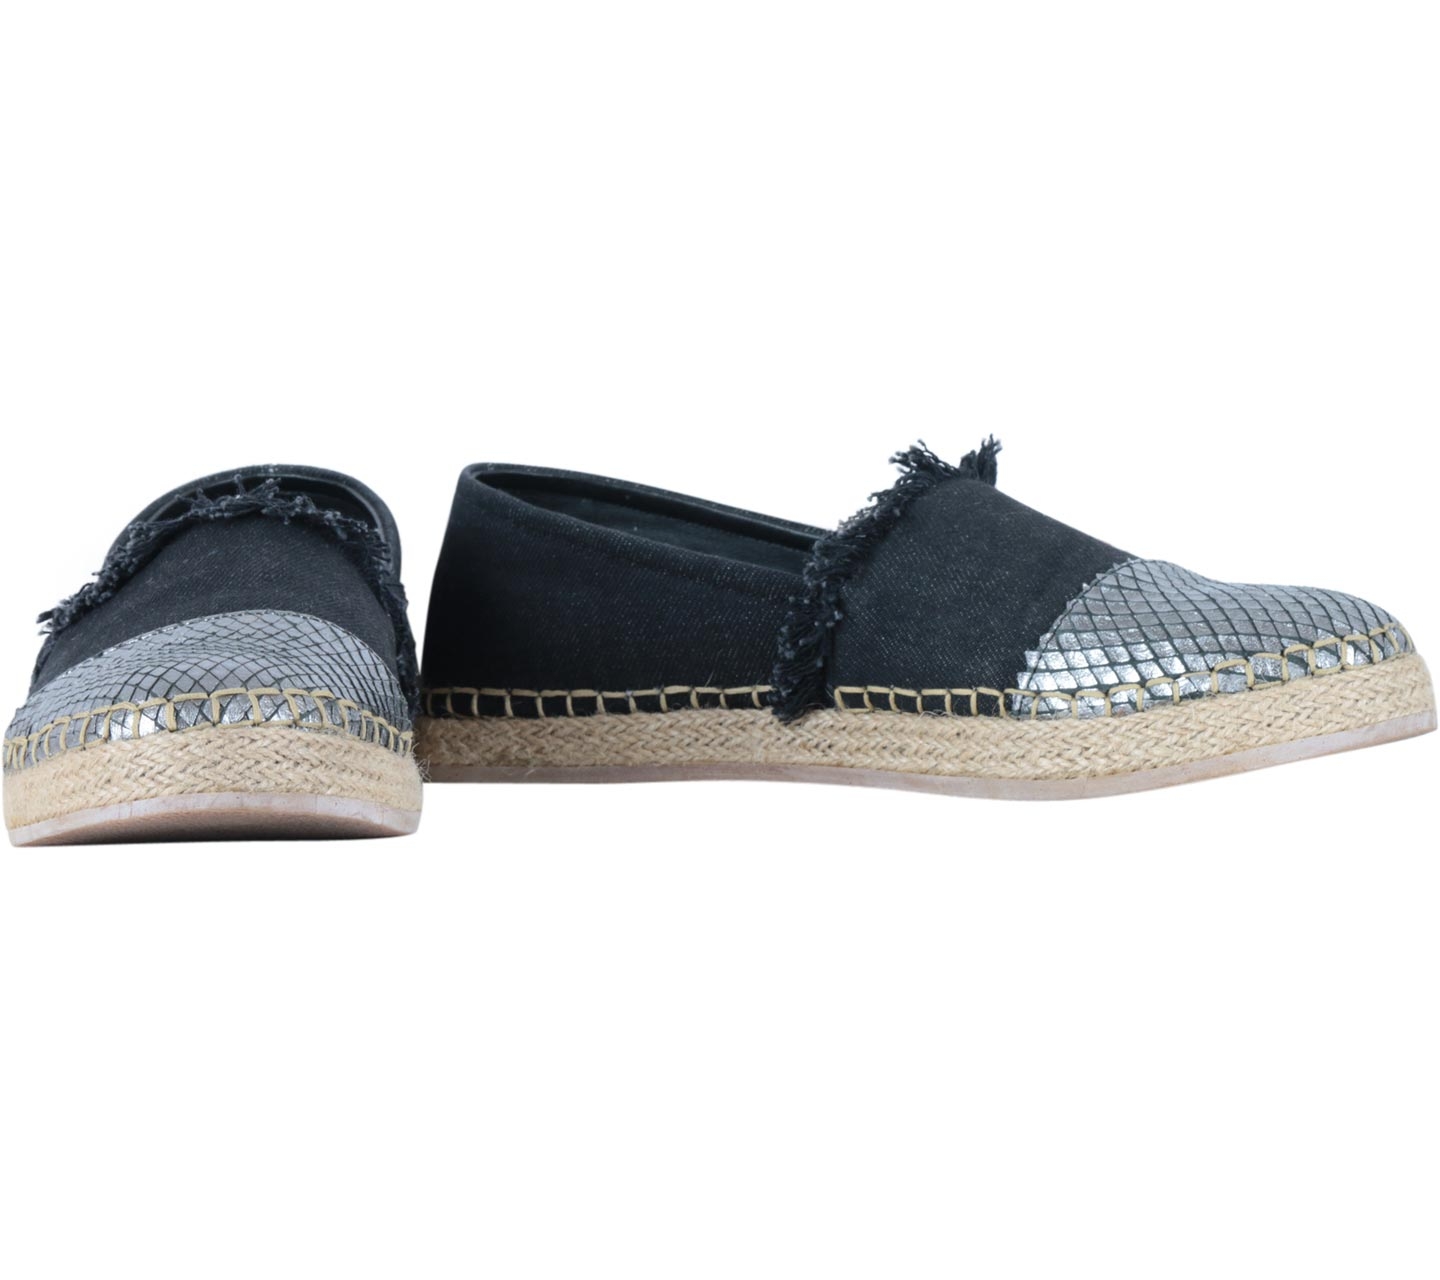 We Are Simplicite Black And Silver Snake Skin Espadrilles Flats